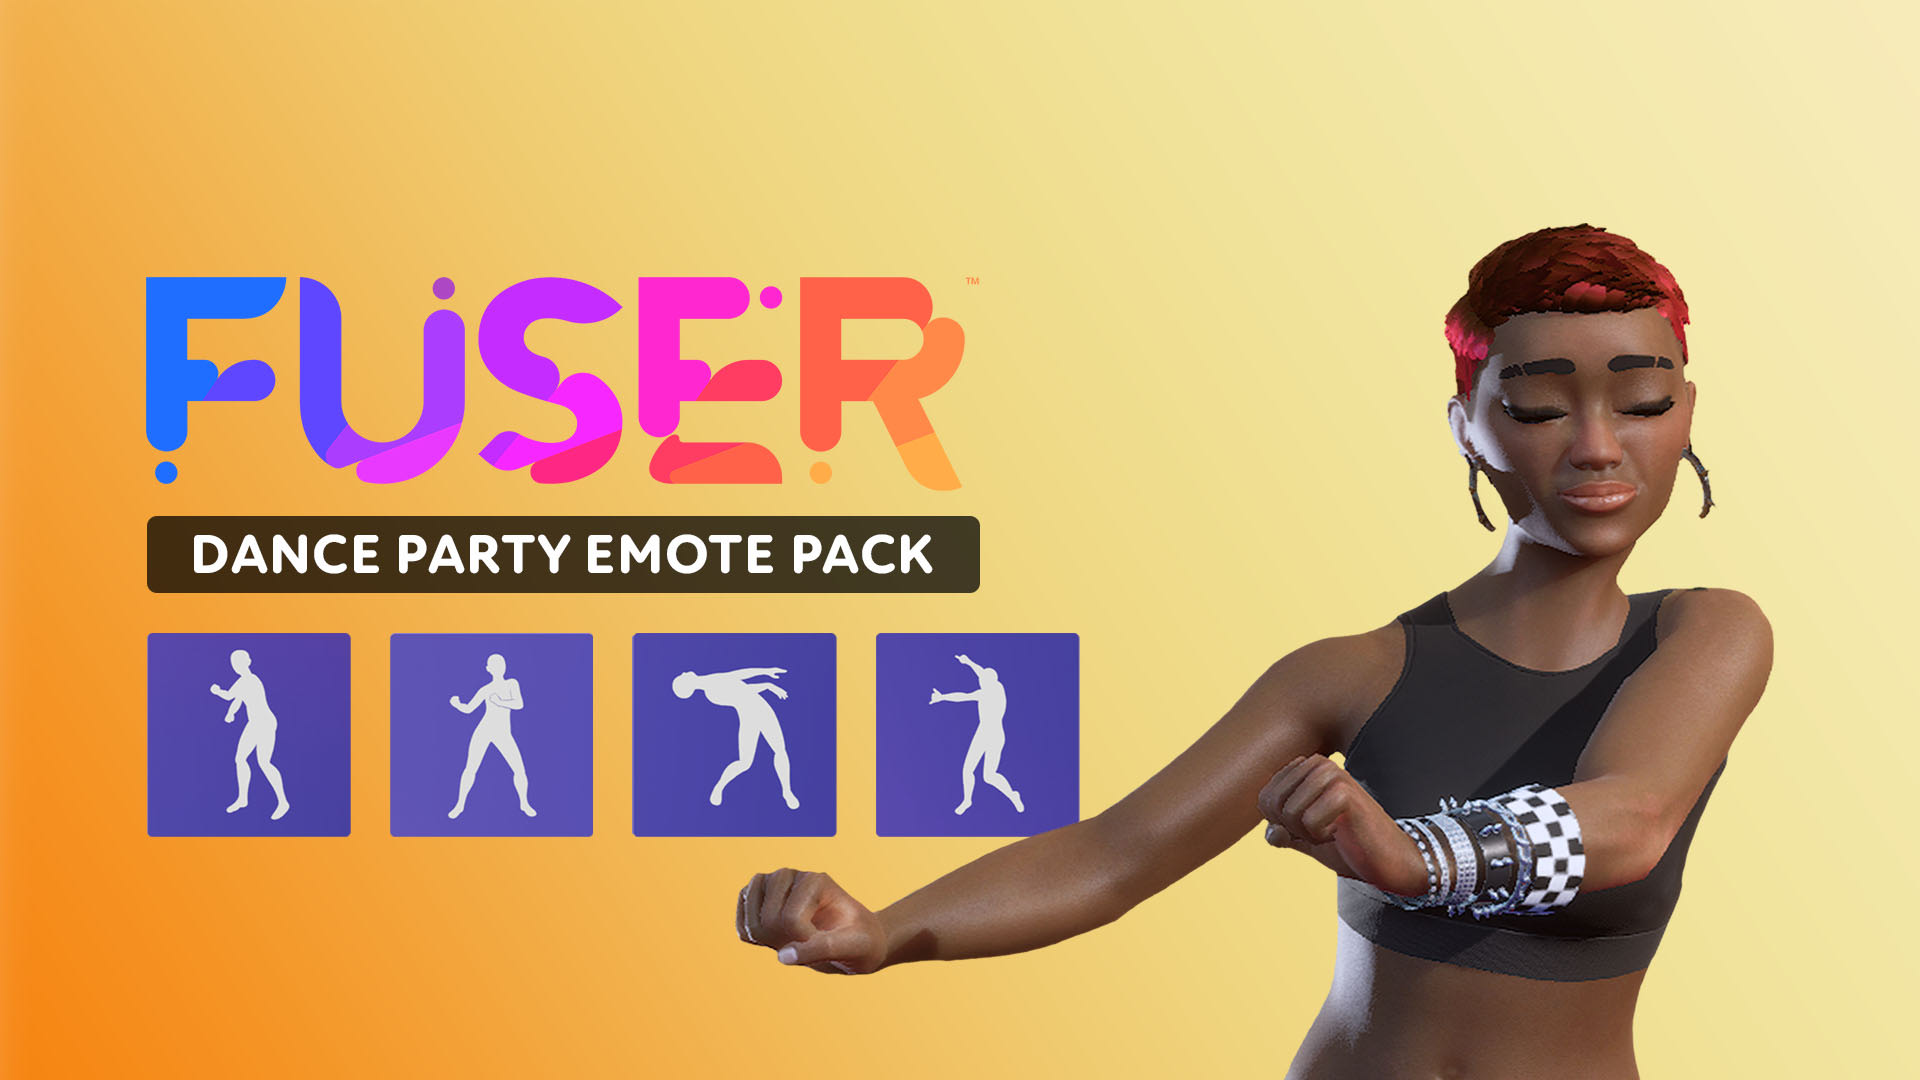 Emotes Pack: Dance Party